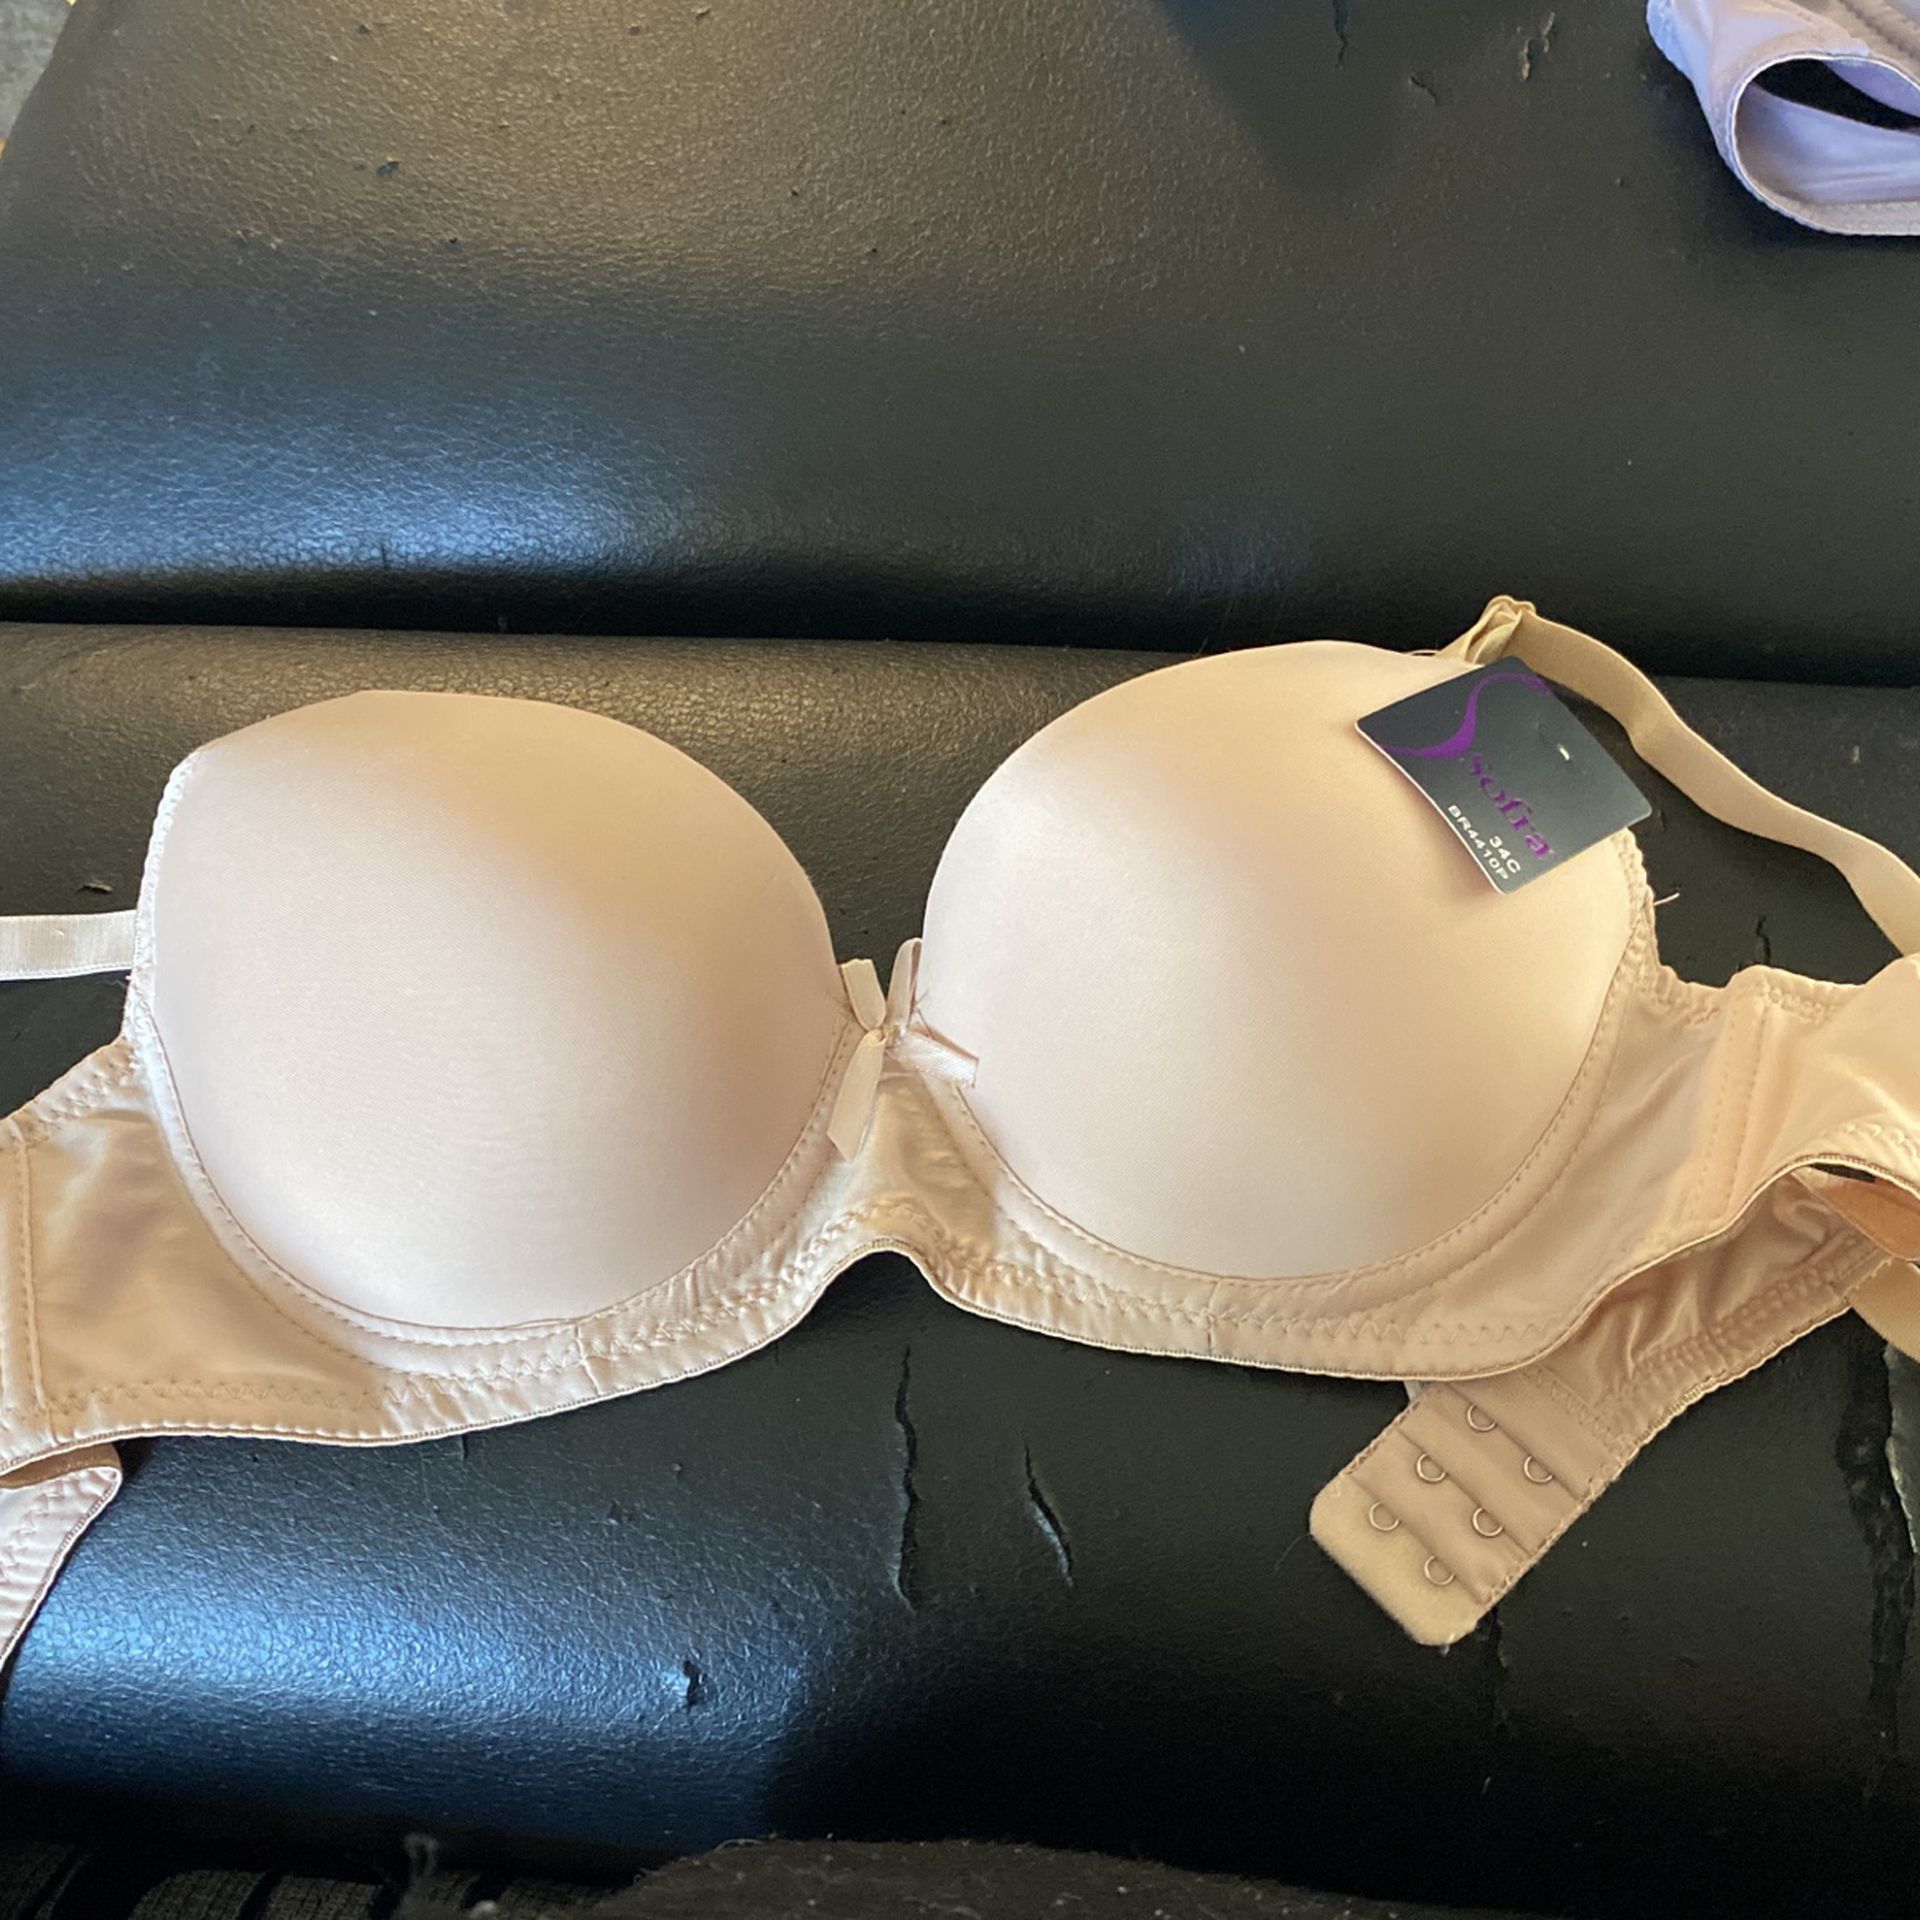 Tan 34 C Cup Bra for Sale in Moreno Valley, CA - OfferUp